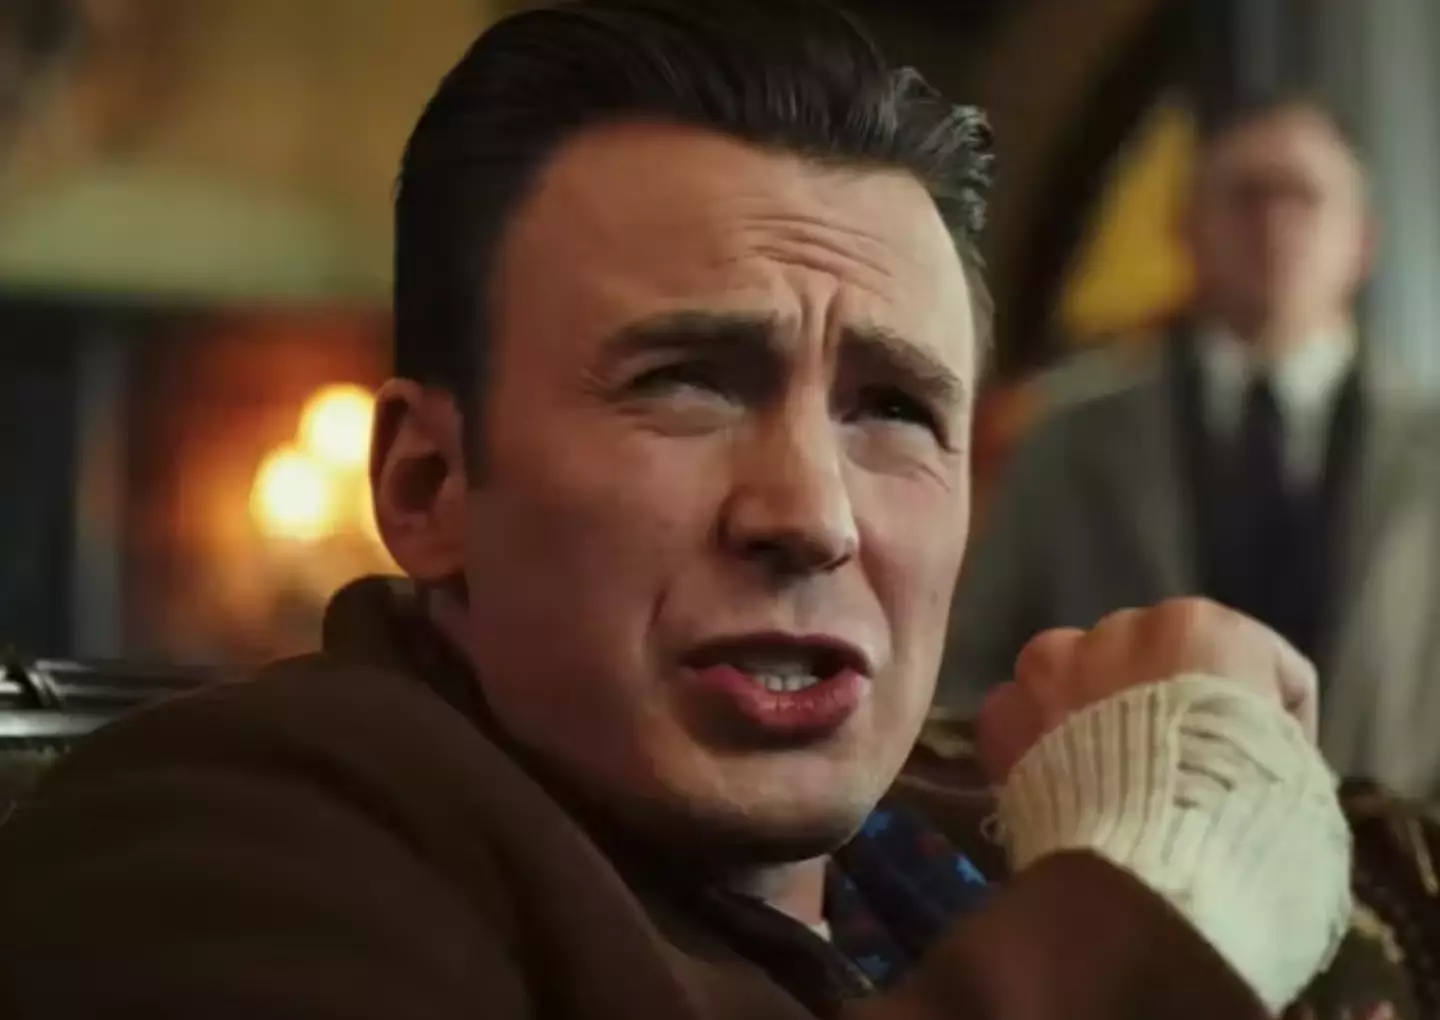 Chris Evans' character uses an Android in the film.